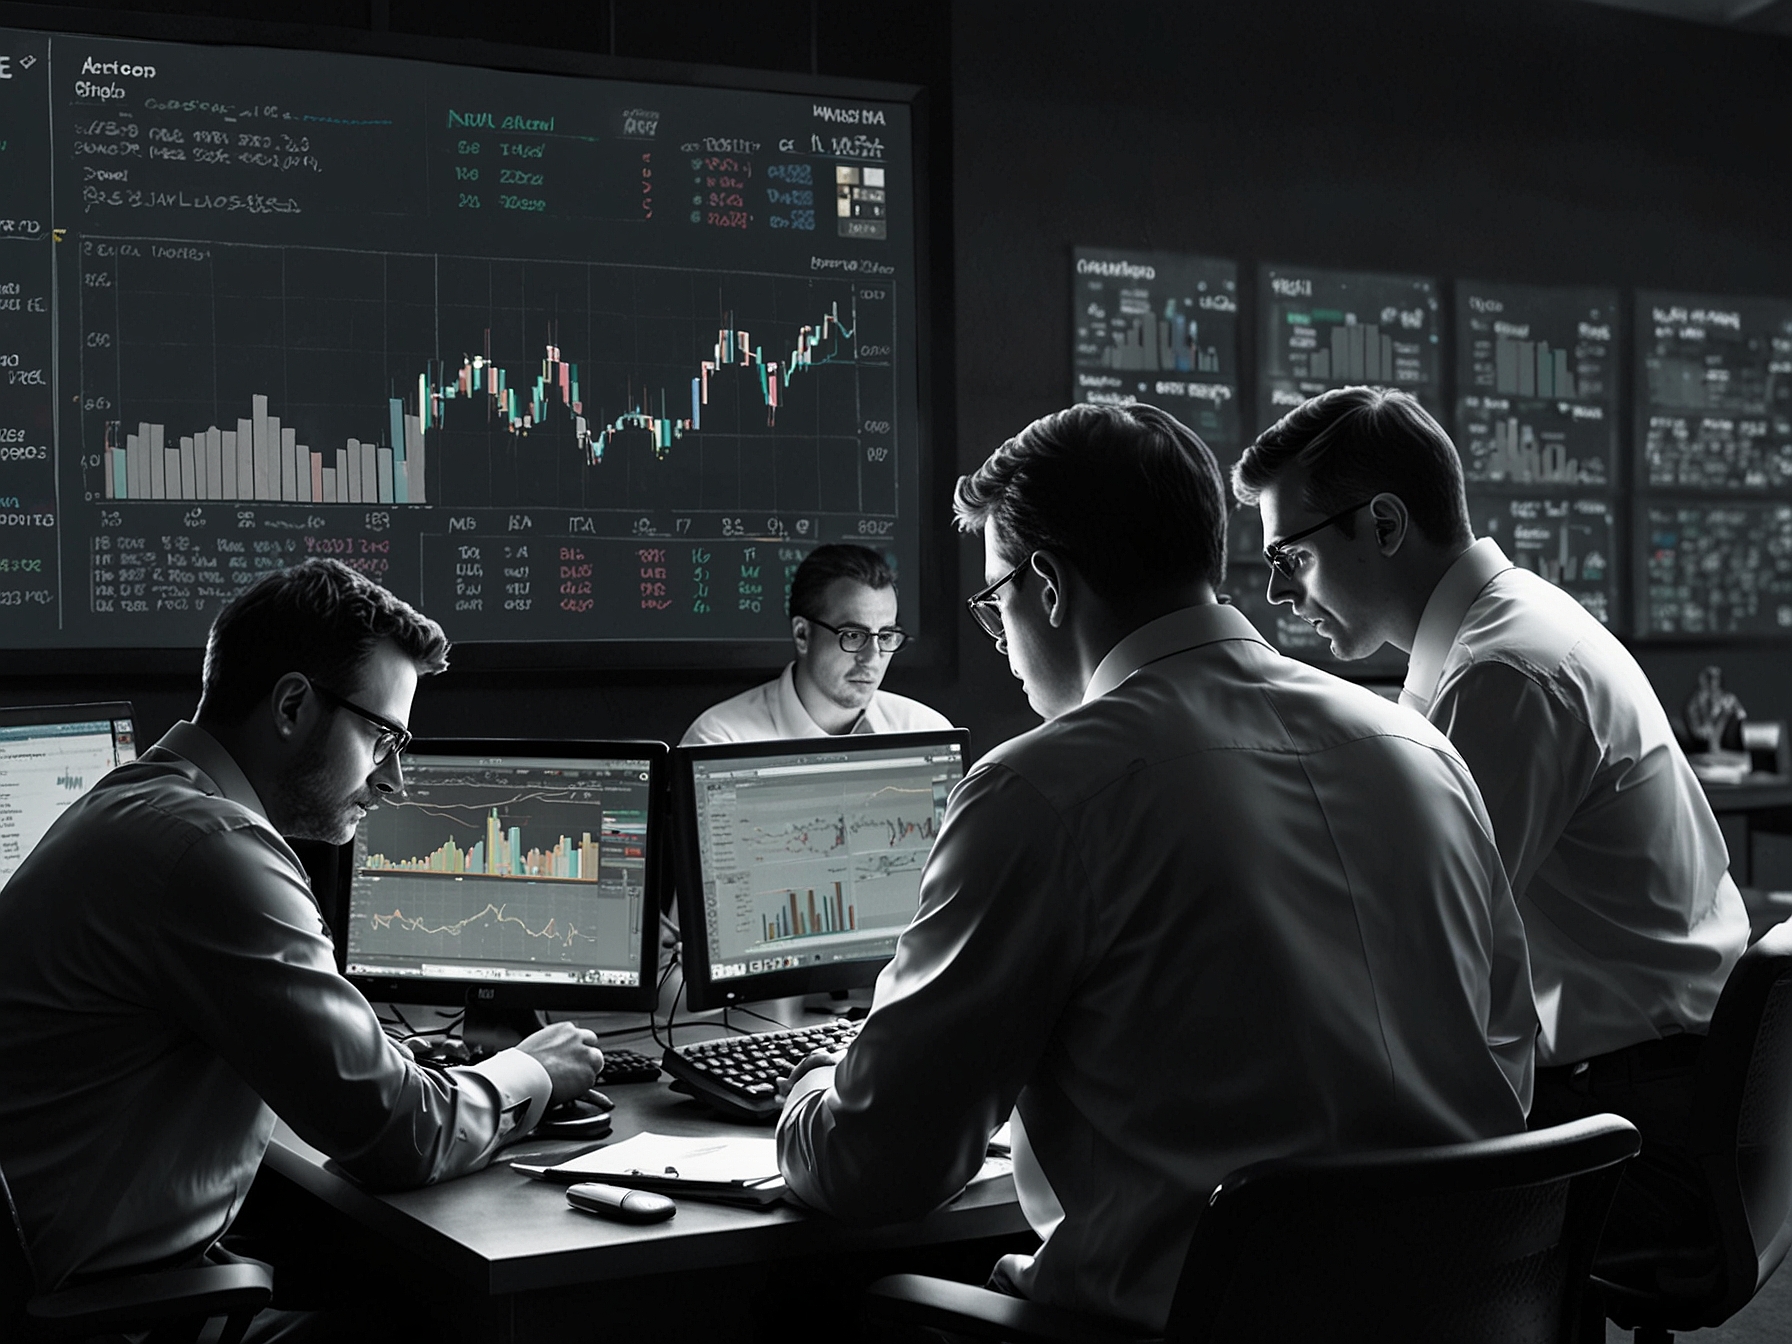 Investors and market analysts discussing the factors behind the TCS share price dip, including market conditions, company news, and competition within the IT services sector.